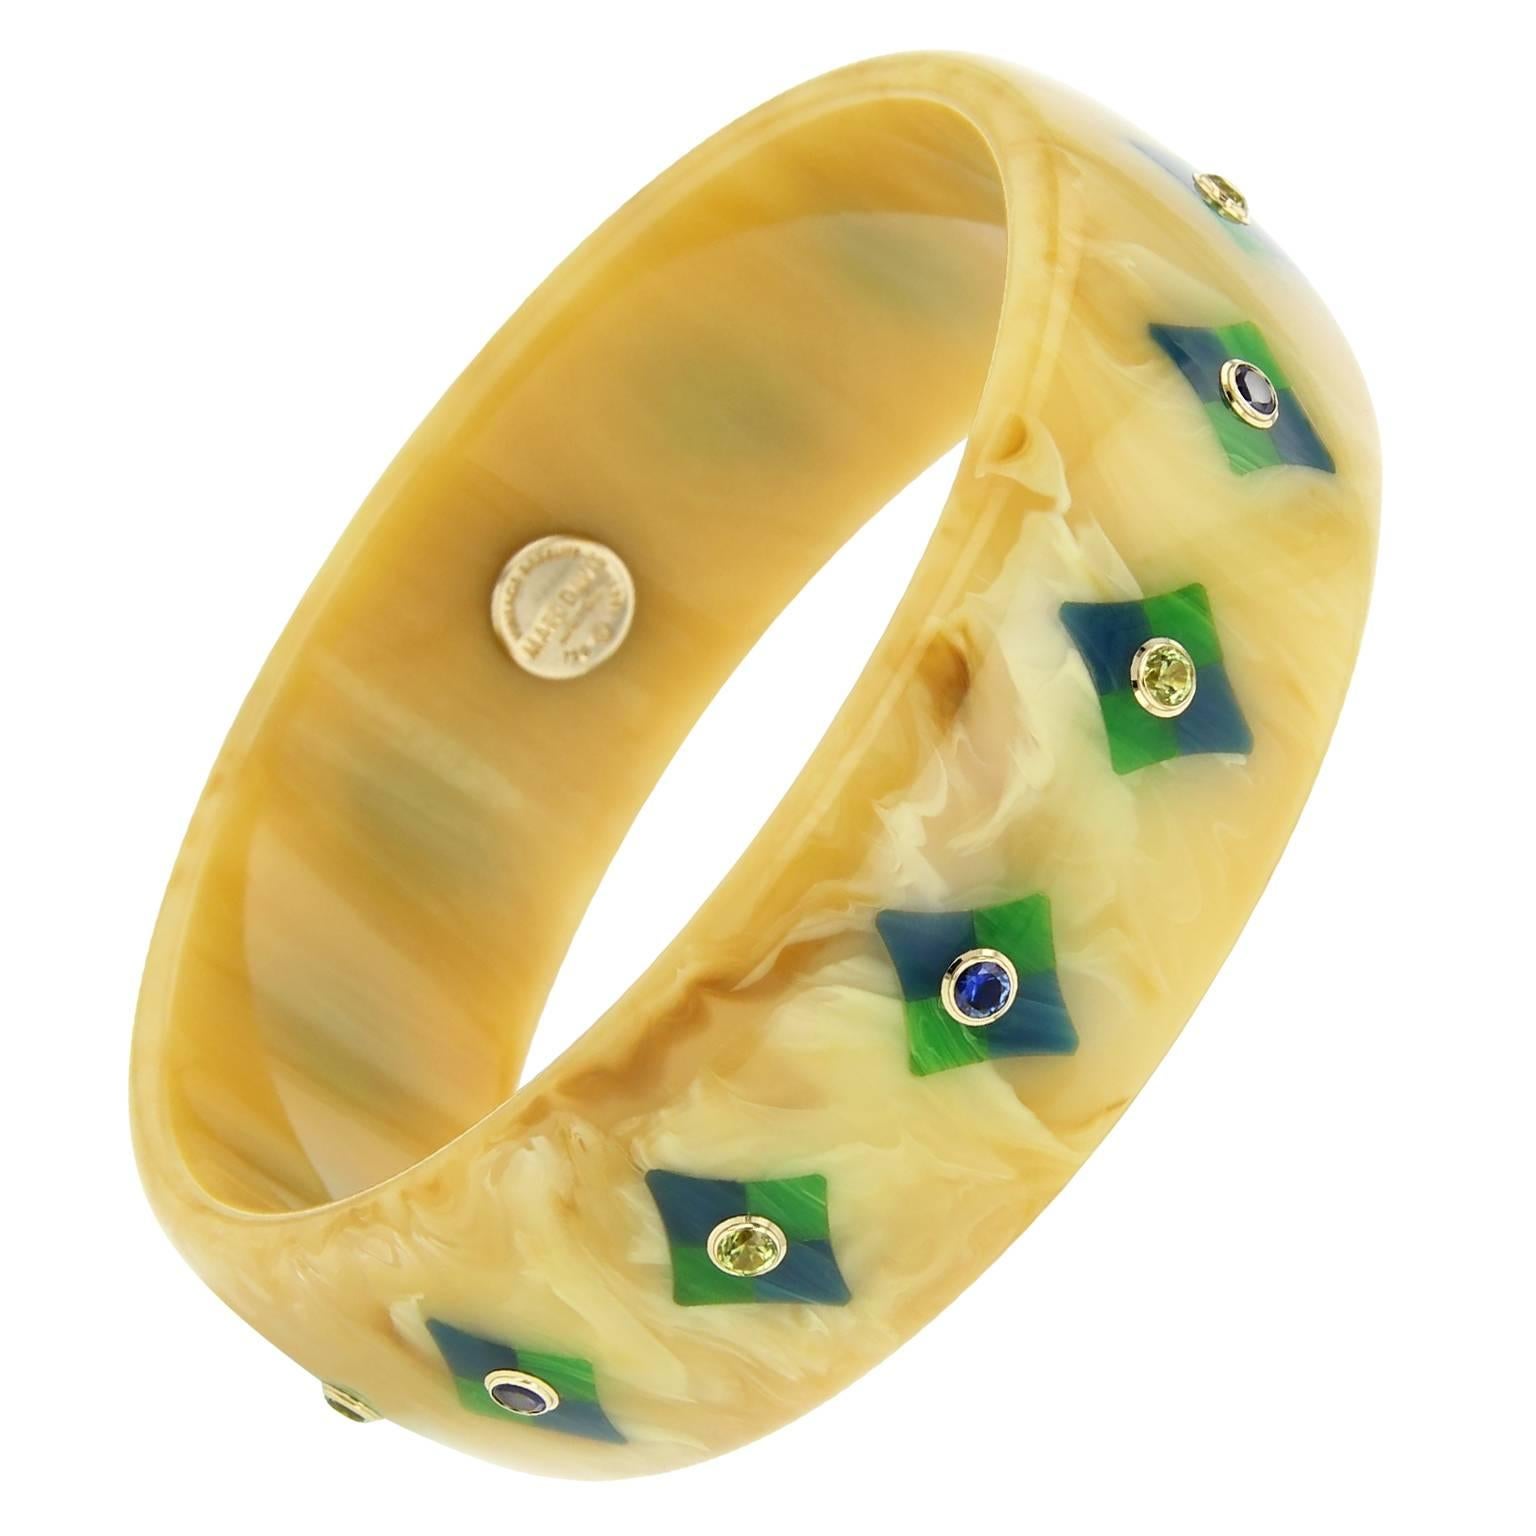 This warm beige and brown Mark Davis bangle was handcrafted using vintage marbled bakelite. The diamond-shaped mosaic pattern was precisely inlaid with pieces of blue and green bakelite.  Each diamond shape is centered with a peridot or fine blue